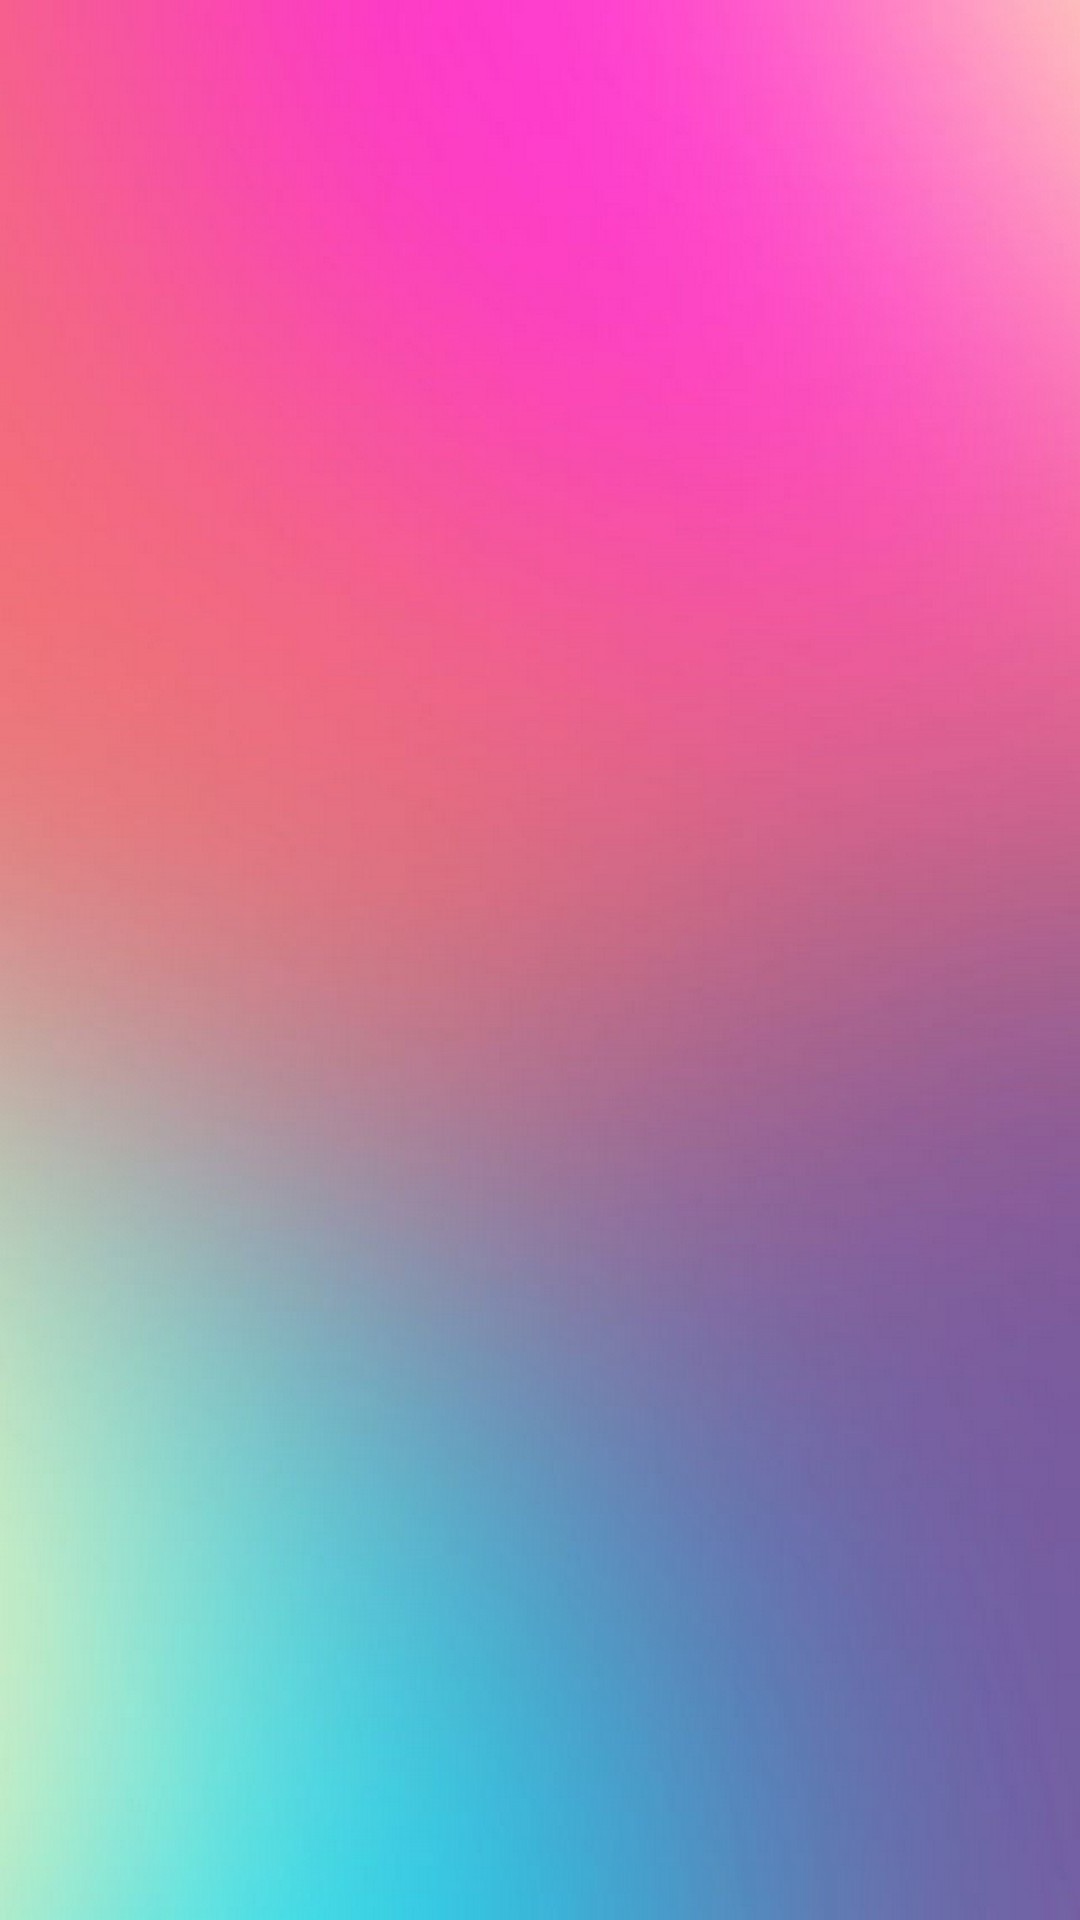 Free download Gradient Backgrounds For Android 2021 Android Wallpapers